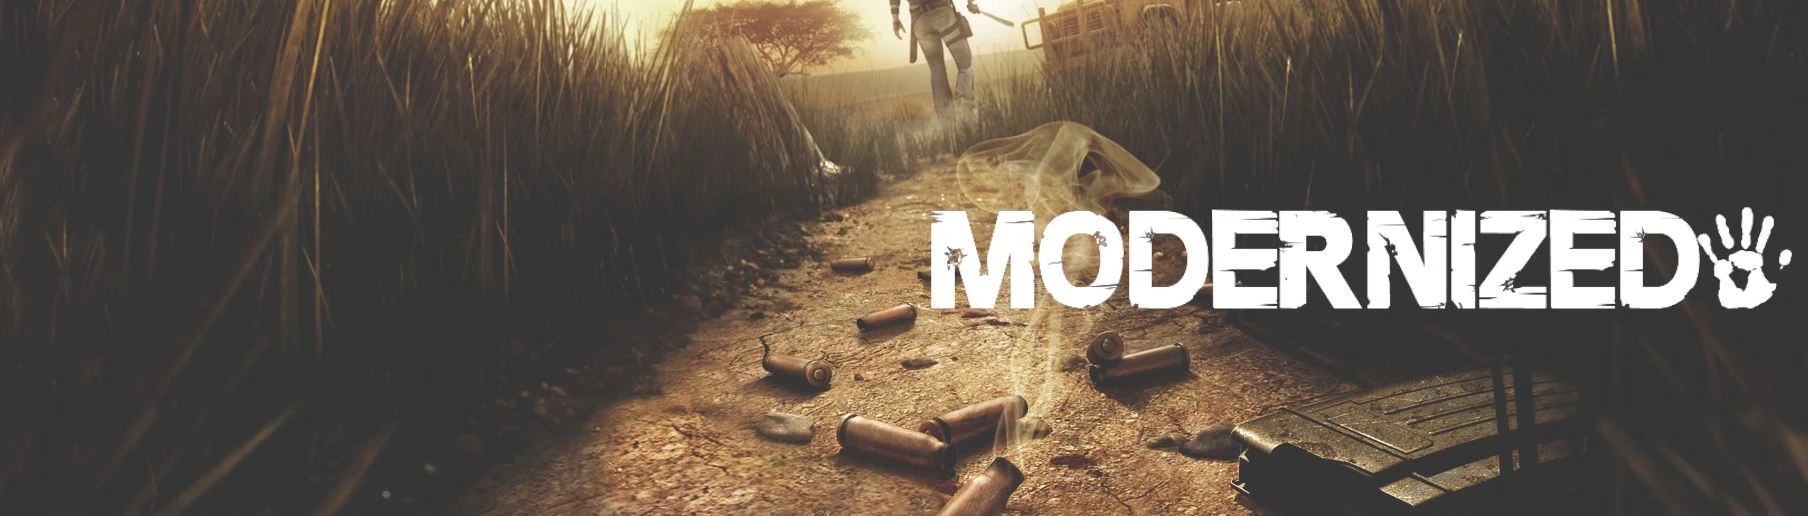 Far Cry 2 - Realism Plus (Tom's Mod) at Far Cry 2 Nexus - Mods and